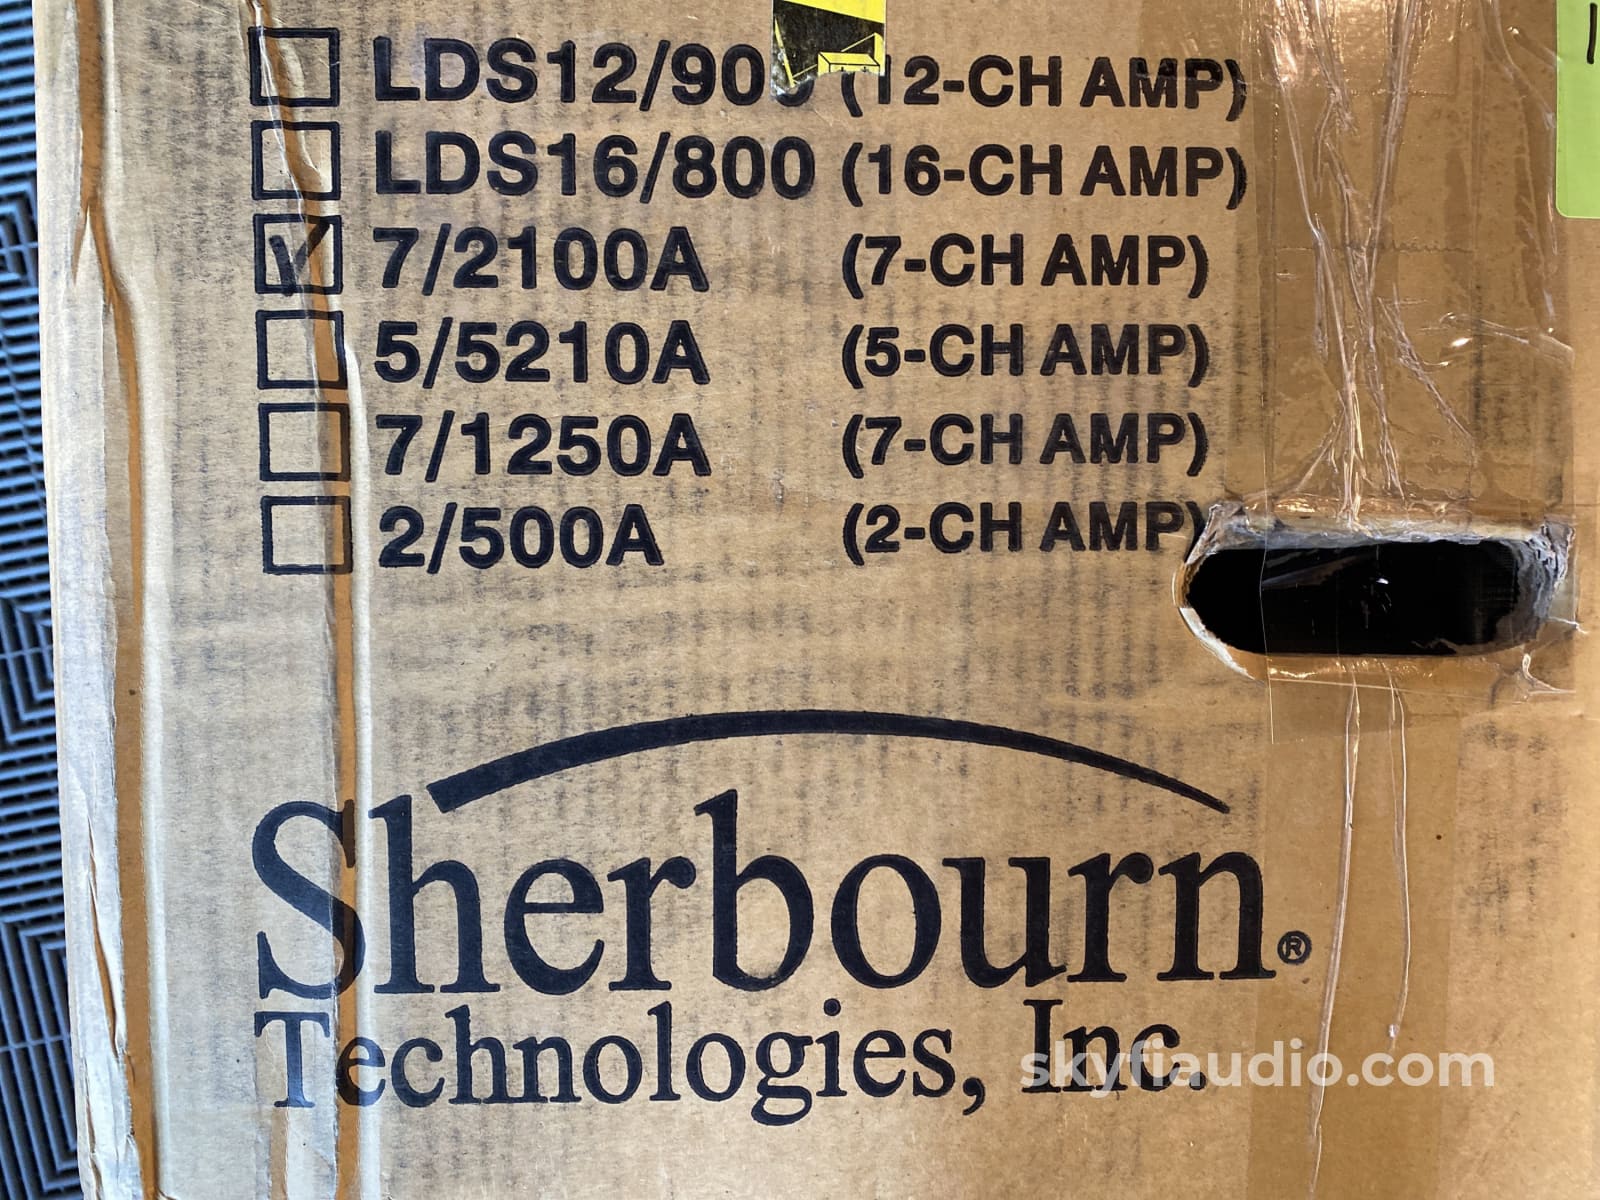 Sherbourn 7/2100A - Seven Channel Theater Amplifier New In Box 200W!